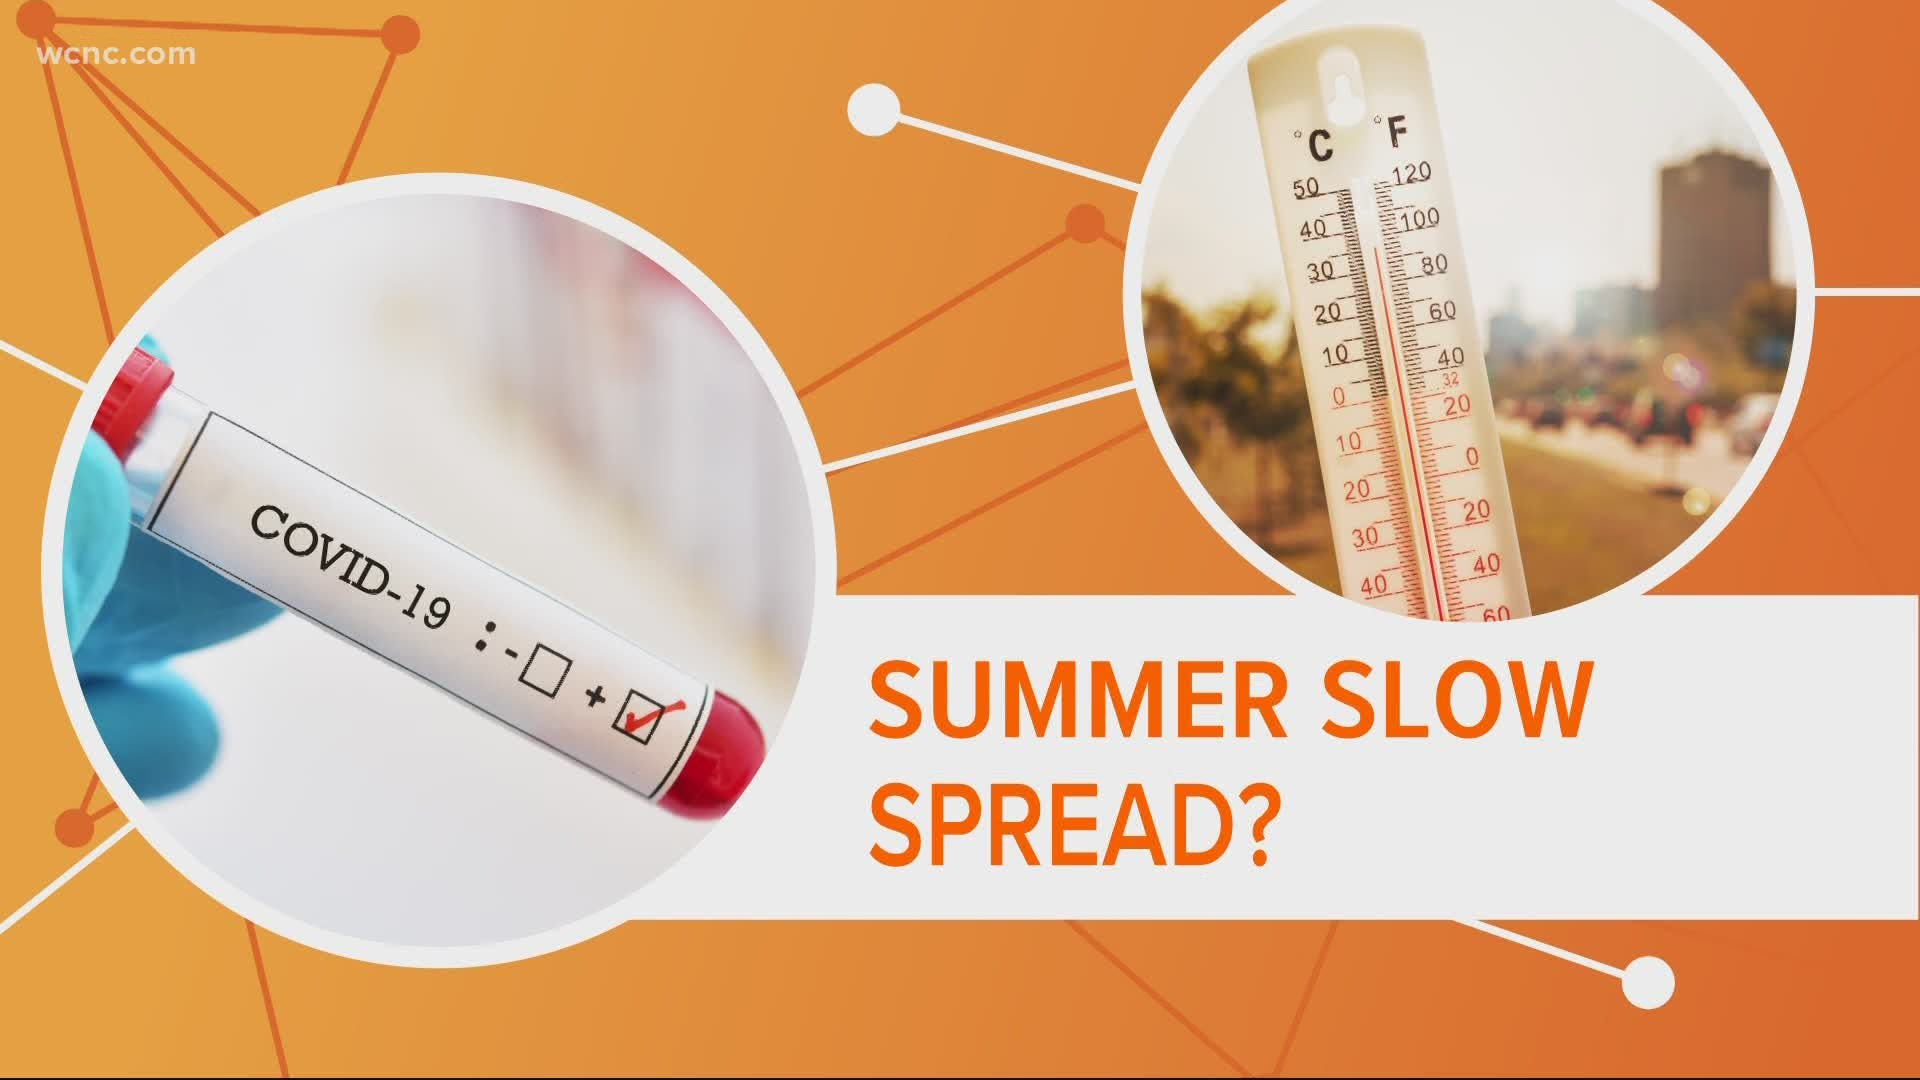 Scientists and even the president that the summer heat would help slow down COVID-19. Now, experts say as cases continue to rise, we have only ourselves to blame.